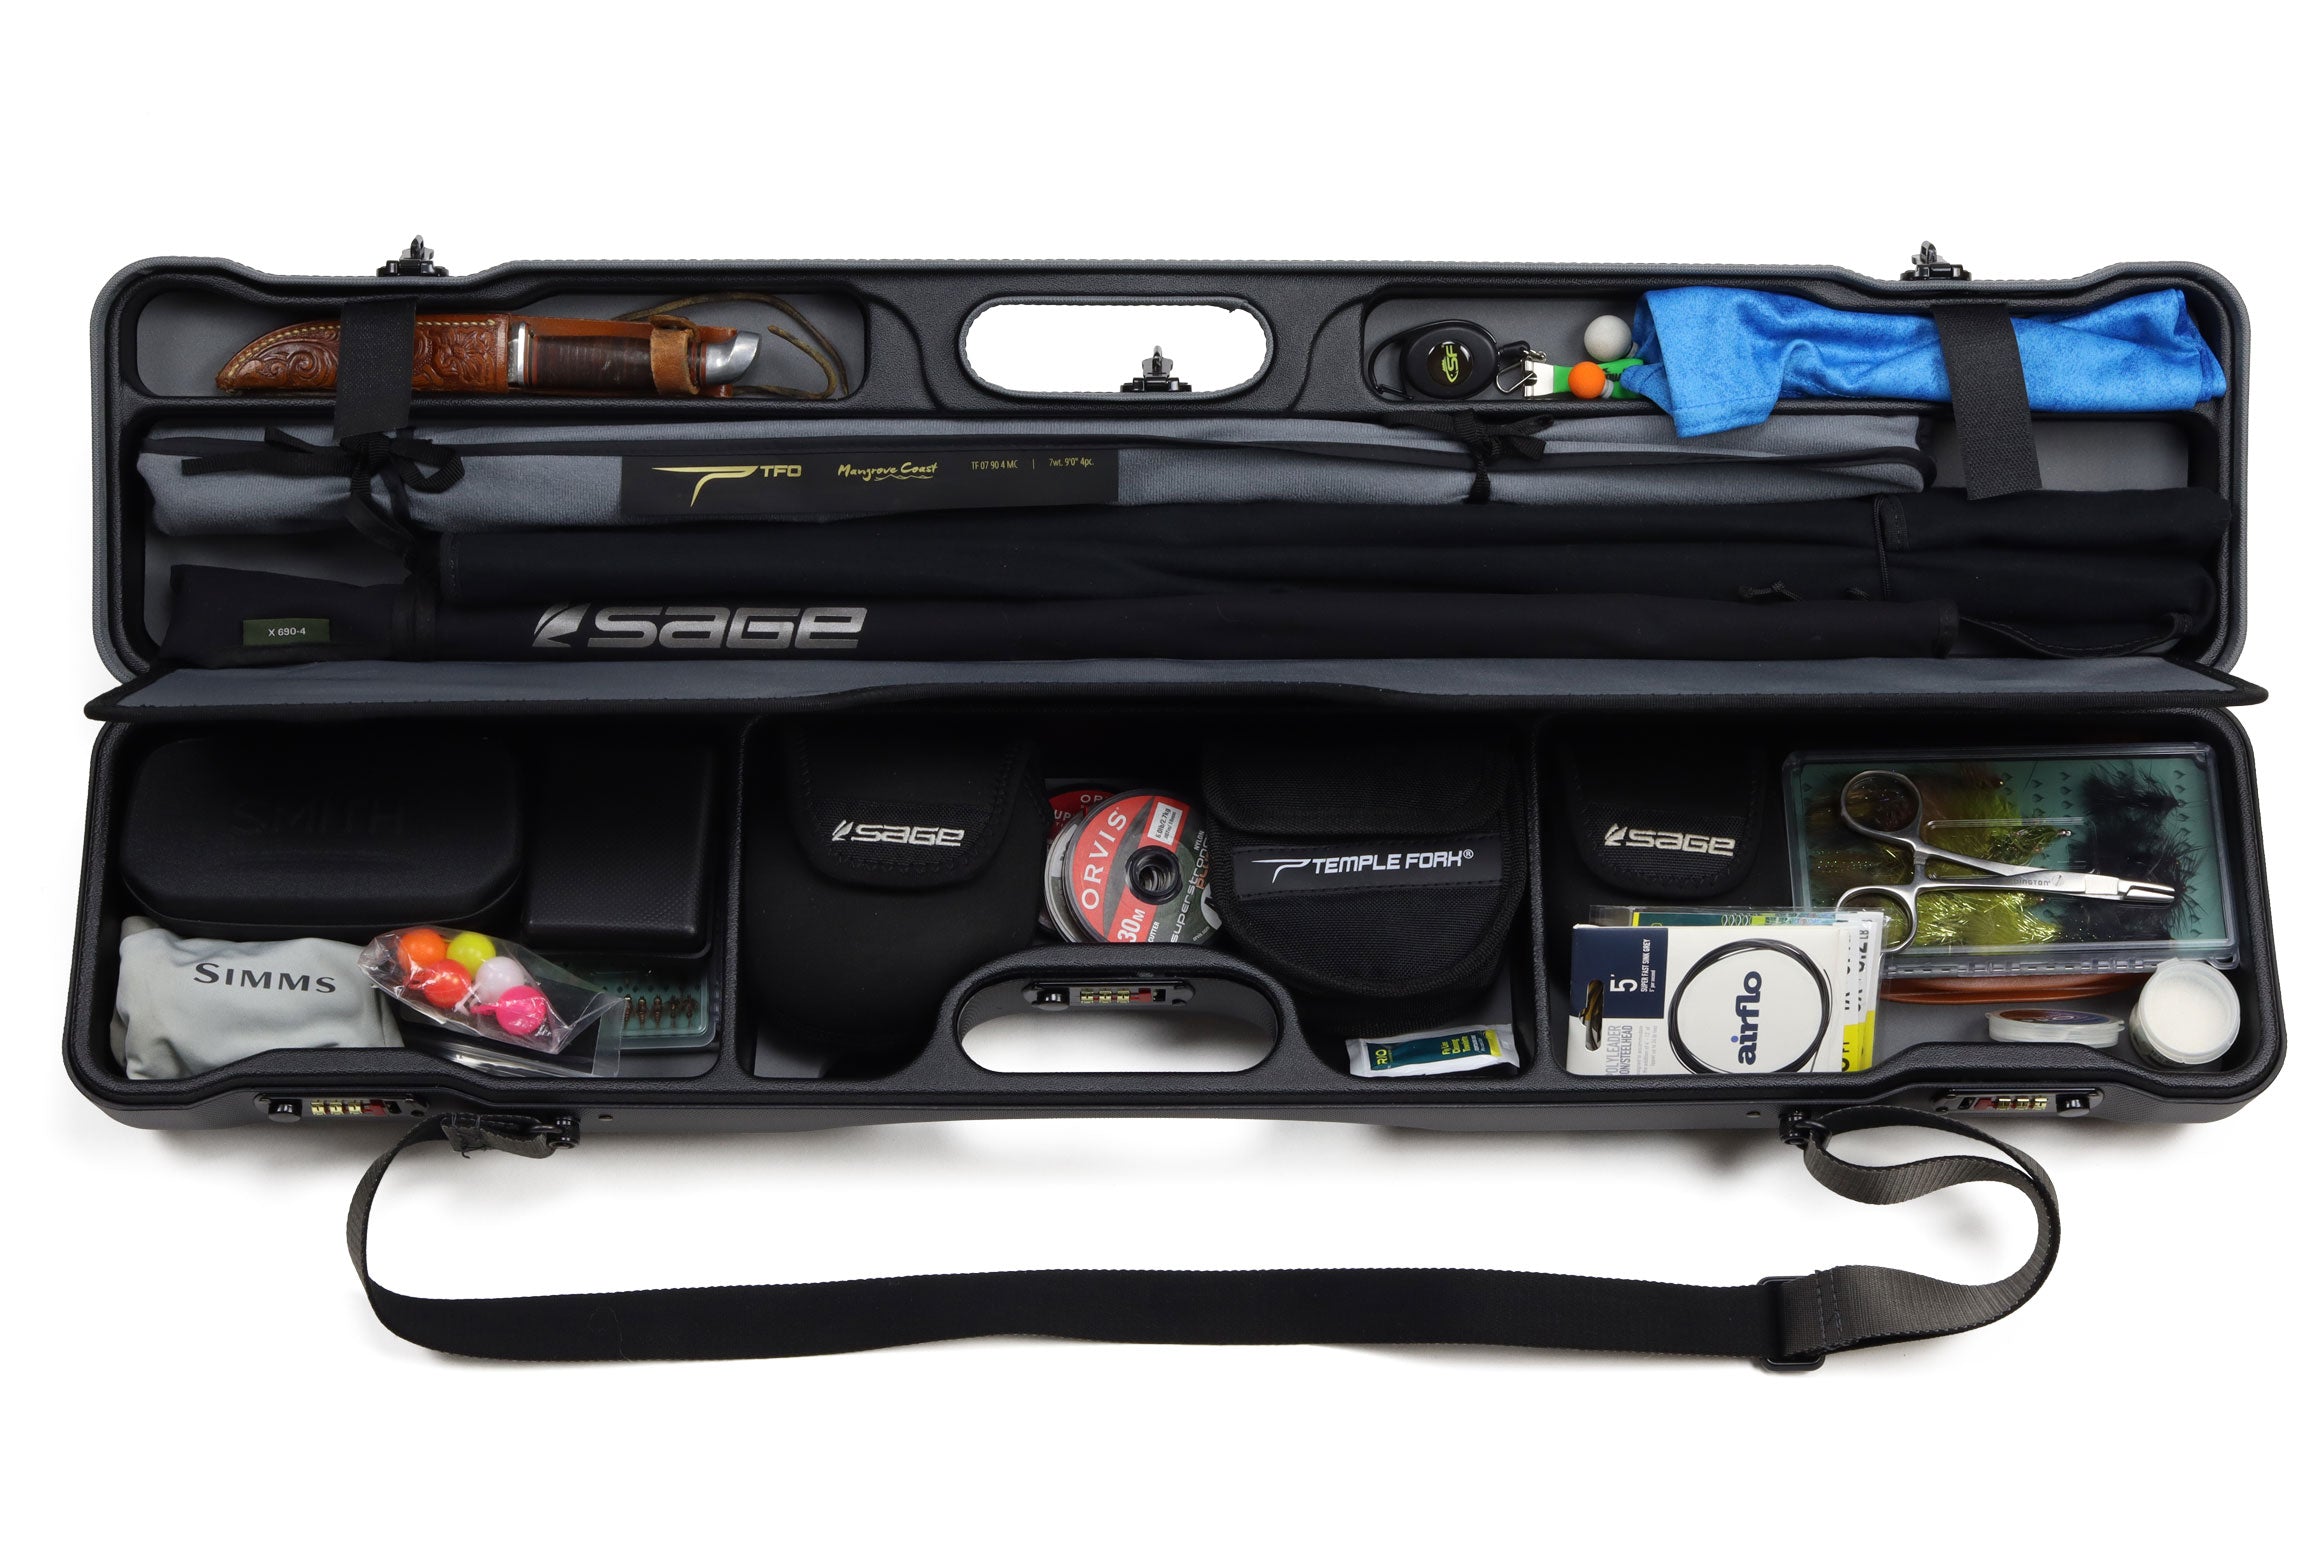 Norfork QR Expedition Fly Fishing Rod & Reel Travel Case – 9.5 FT Rod59079  - Gordy & Sons Outfitters